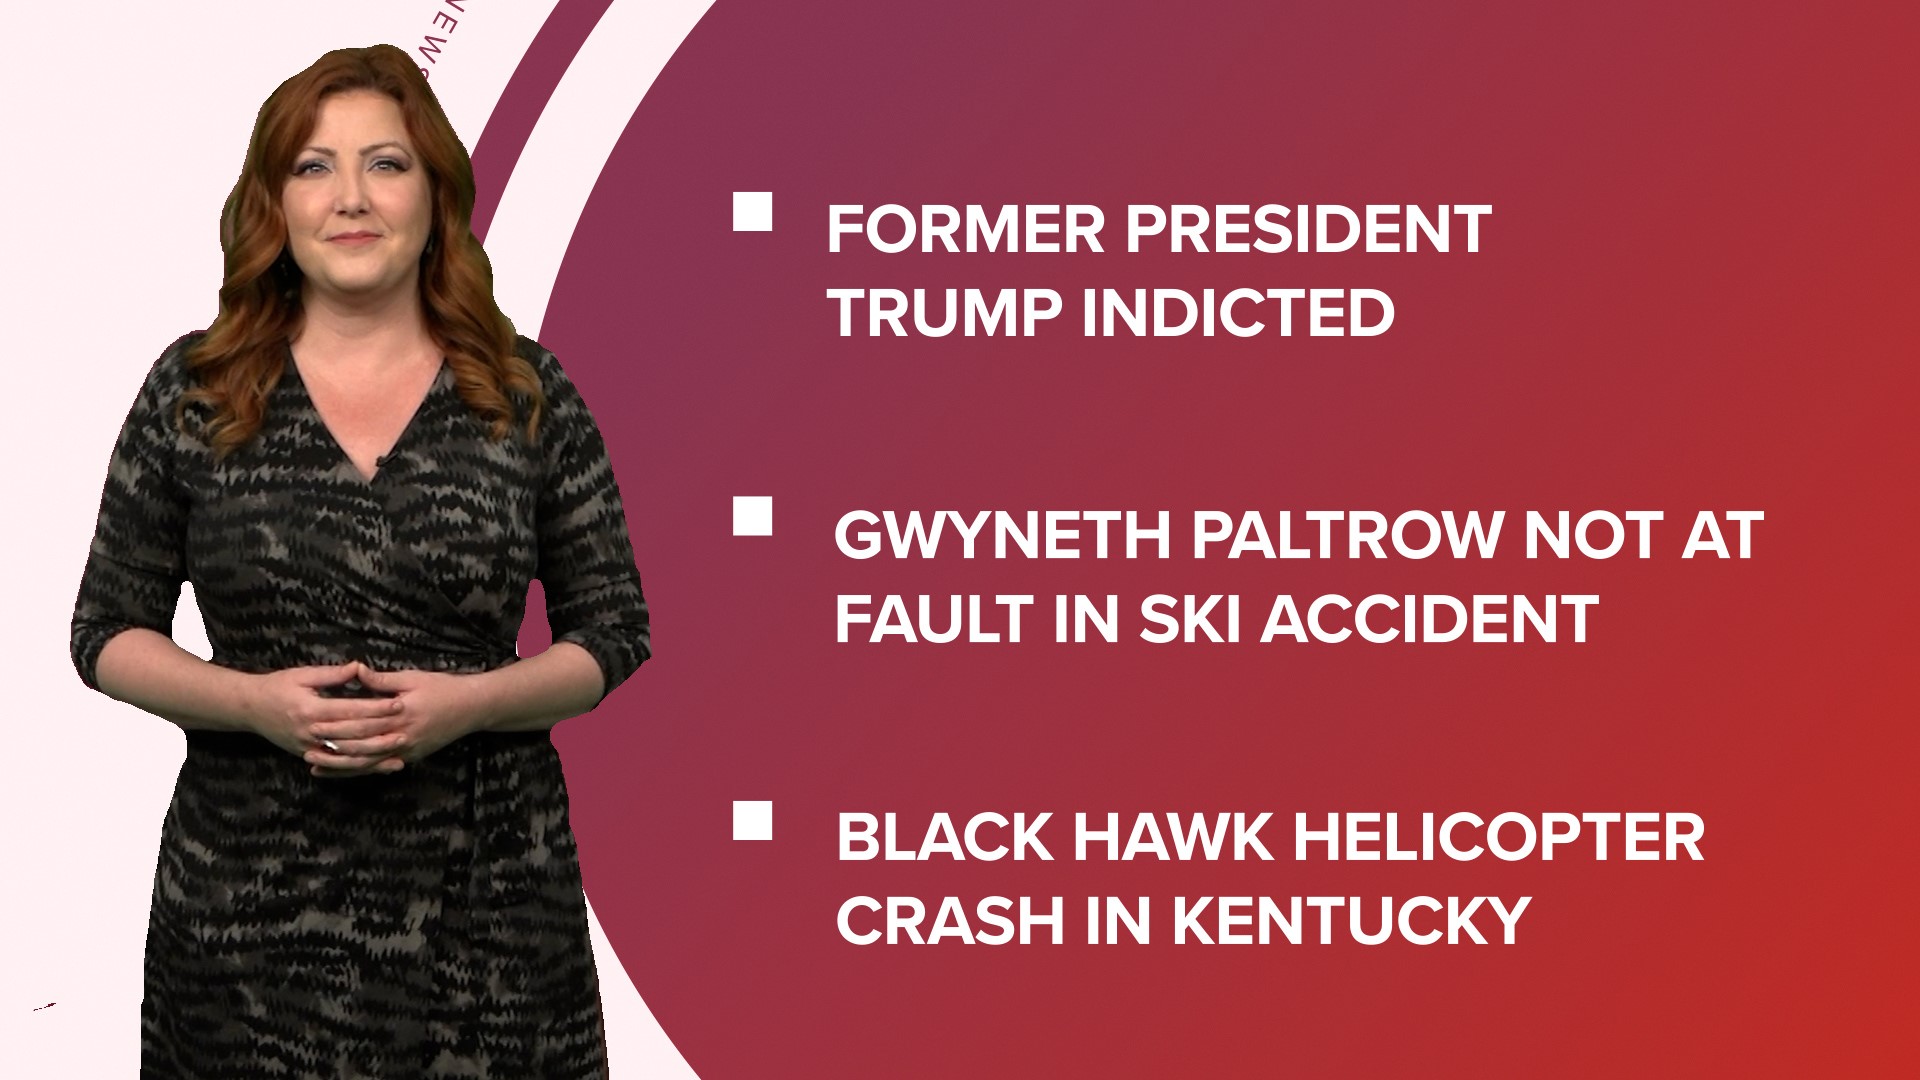 A look at what is happening in the news from the indictment of Donald Trump to a win for Paltrow to a Black Hawk helicopter crash.